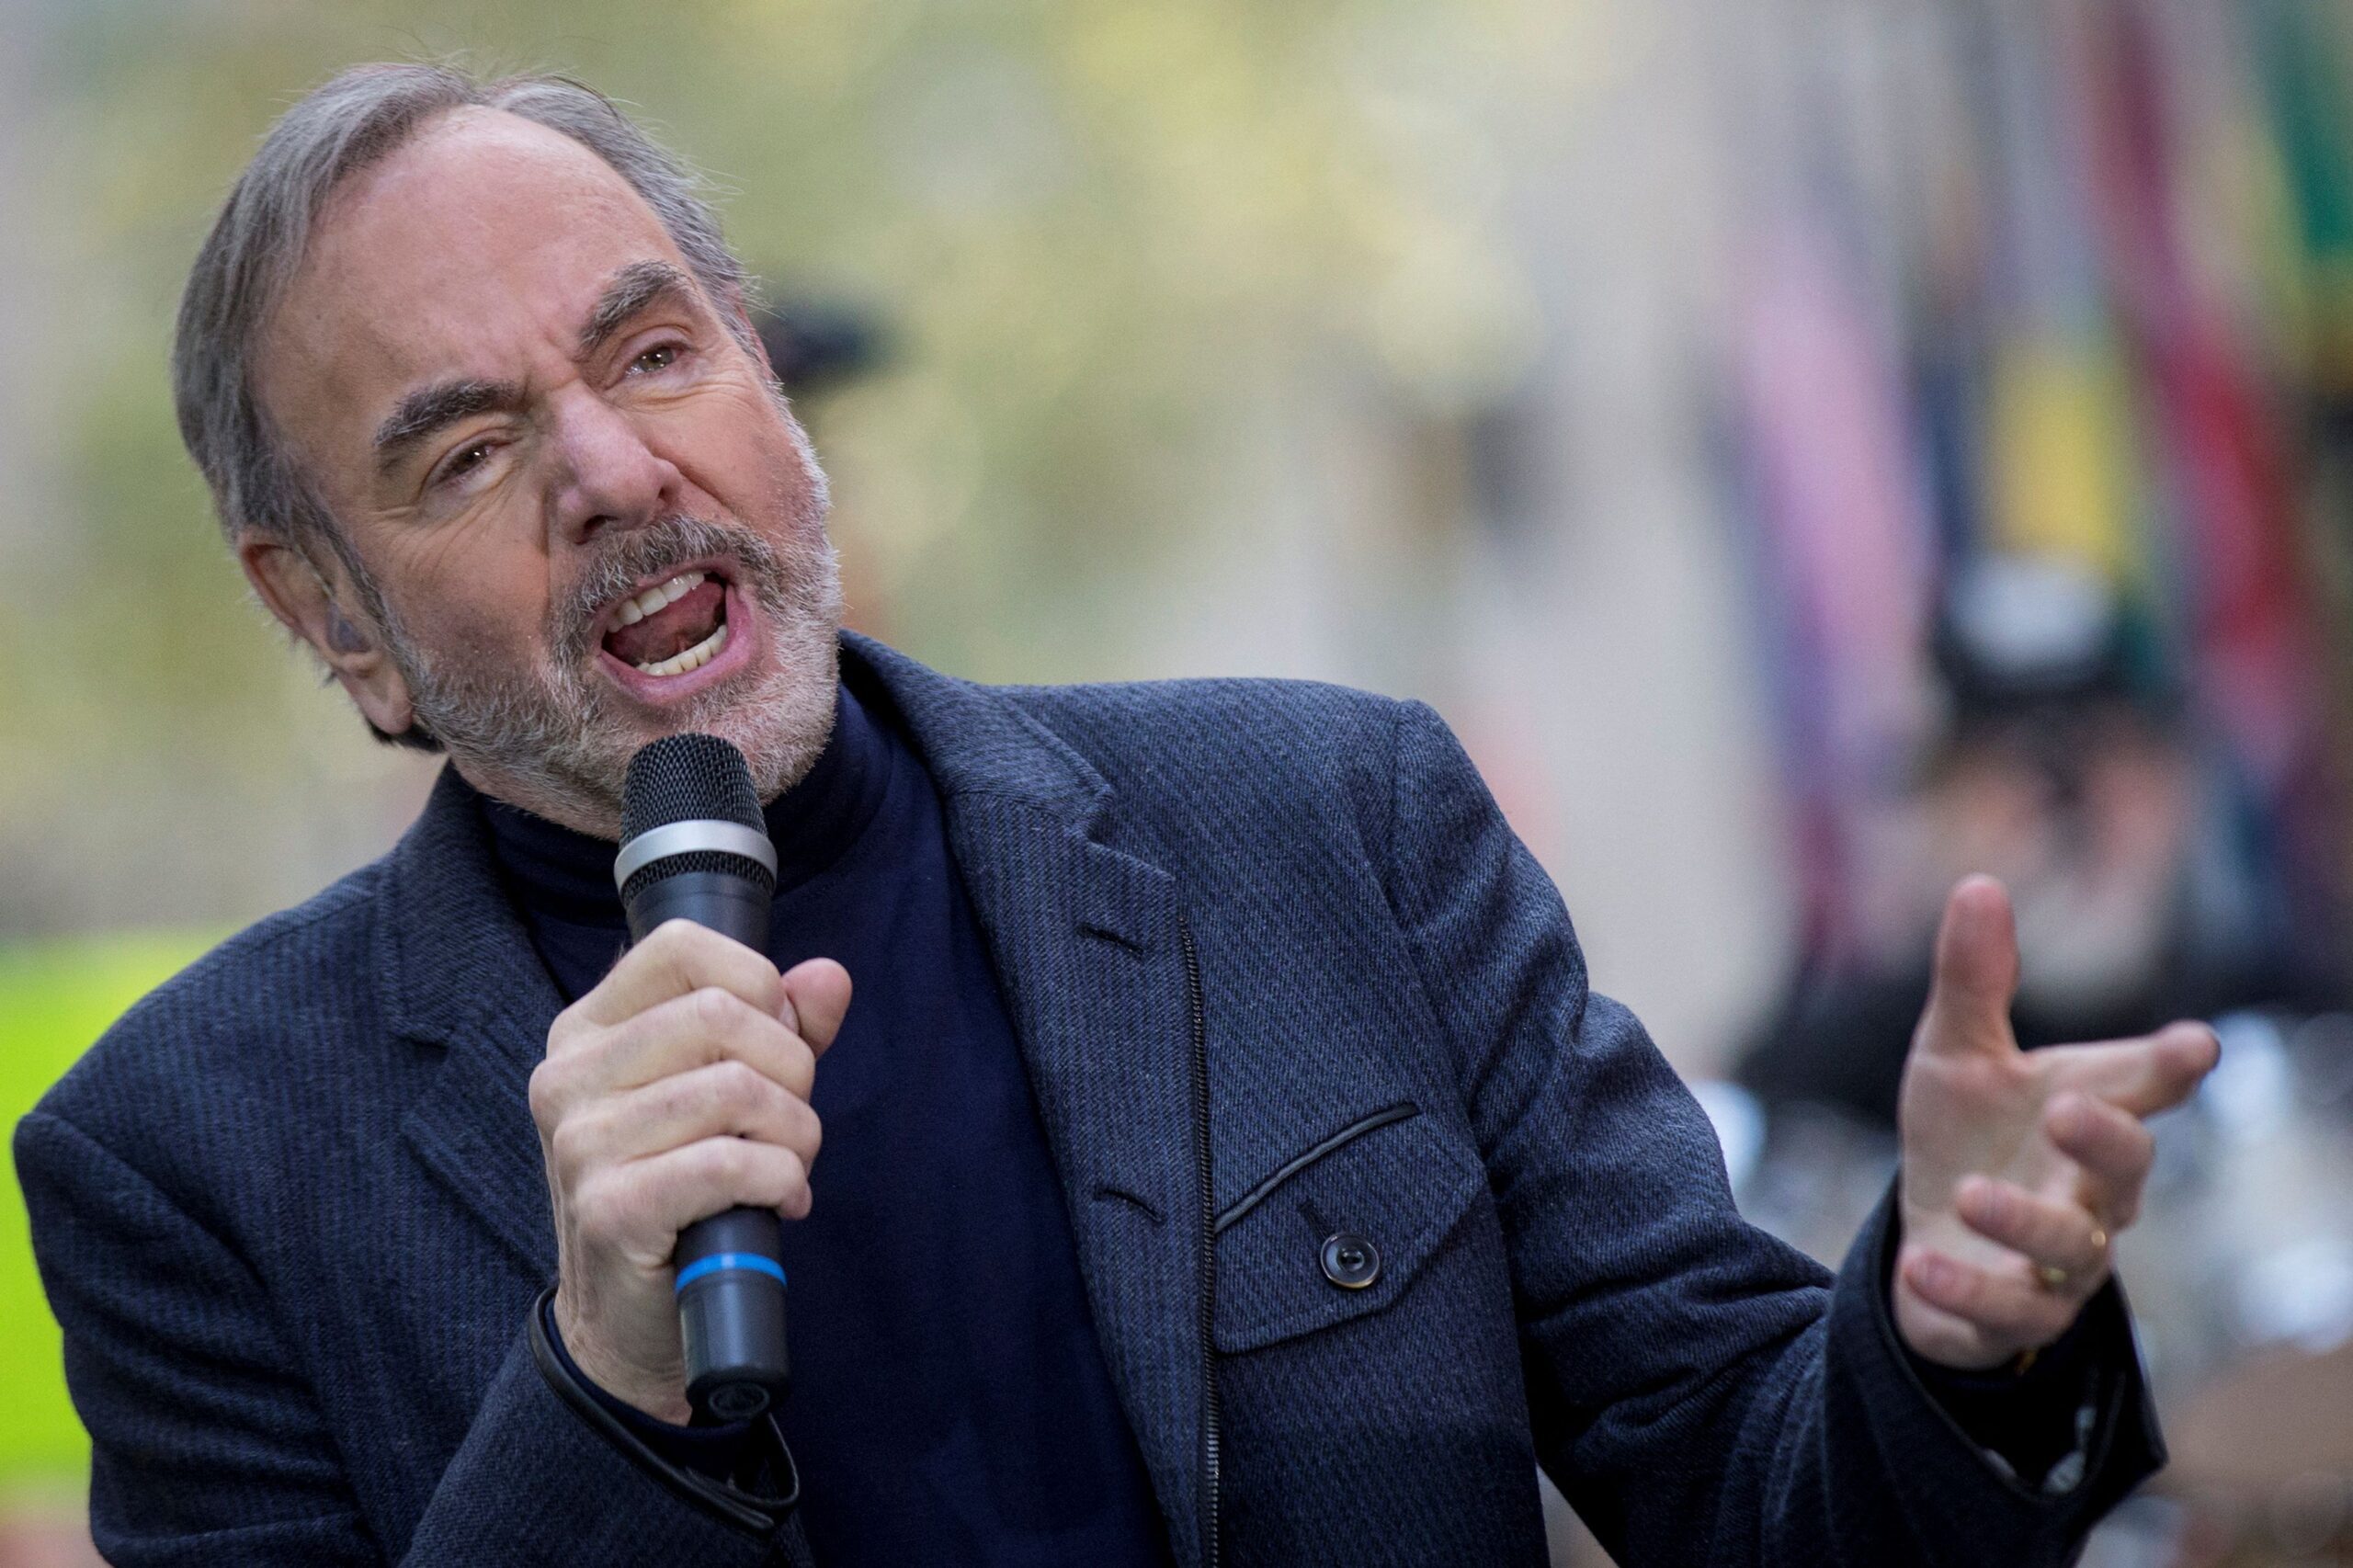 Hitmaker Neil Diamond sells entire song catalogue to Universal Music Group